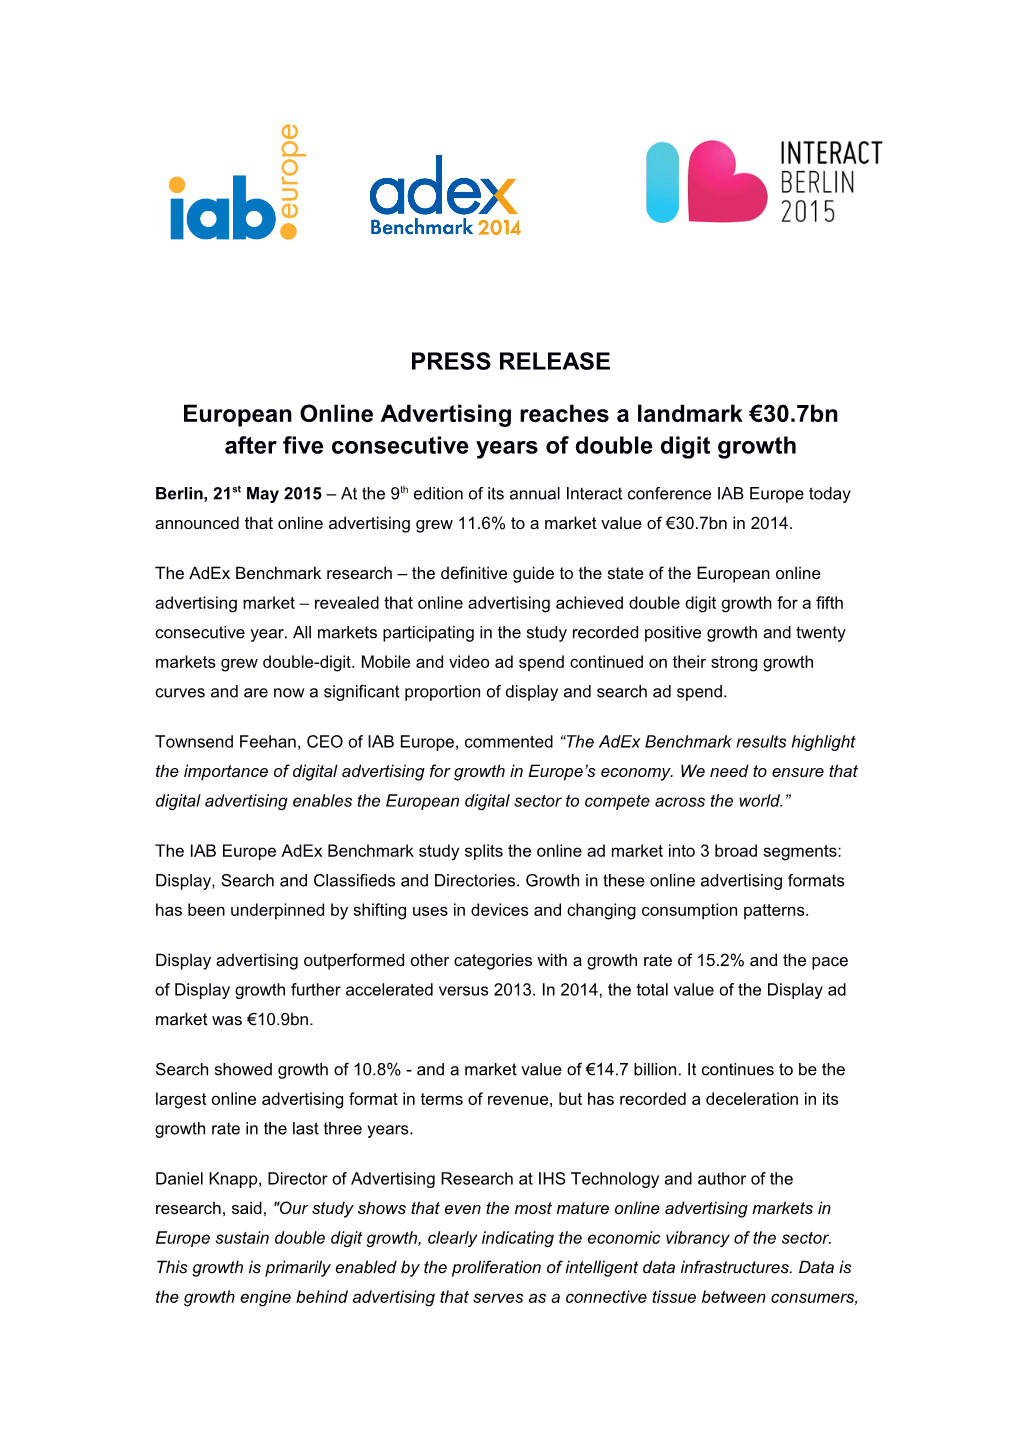 European Online Advertising Reaches a Landmark 30.7Bn After Five Consecutive Years Of